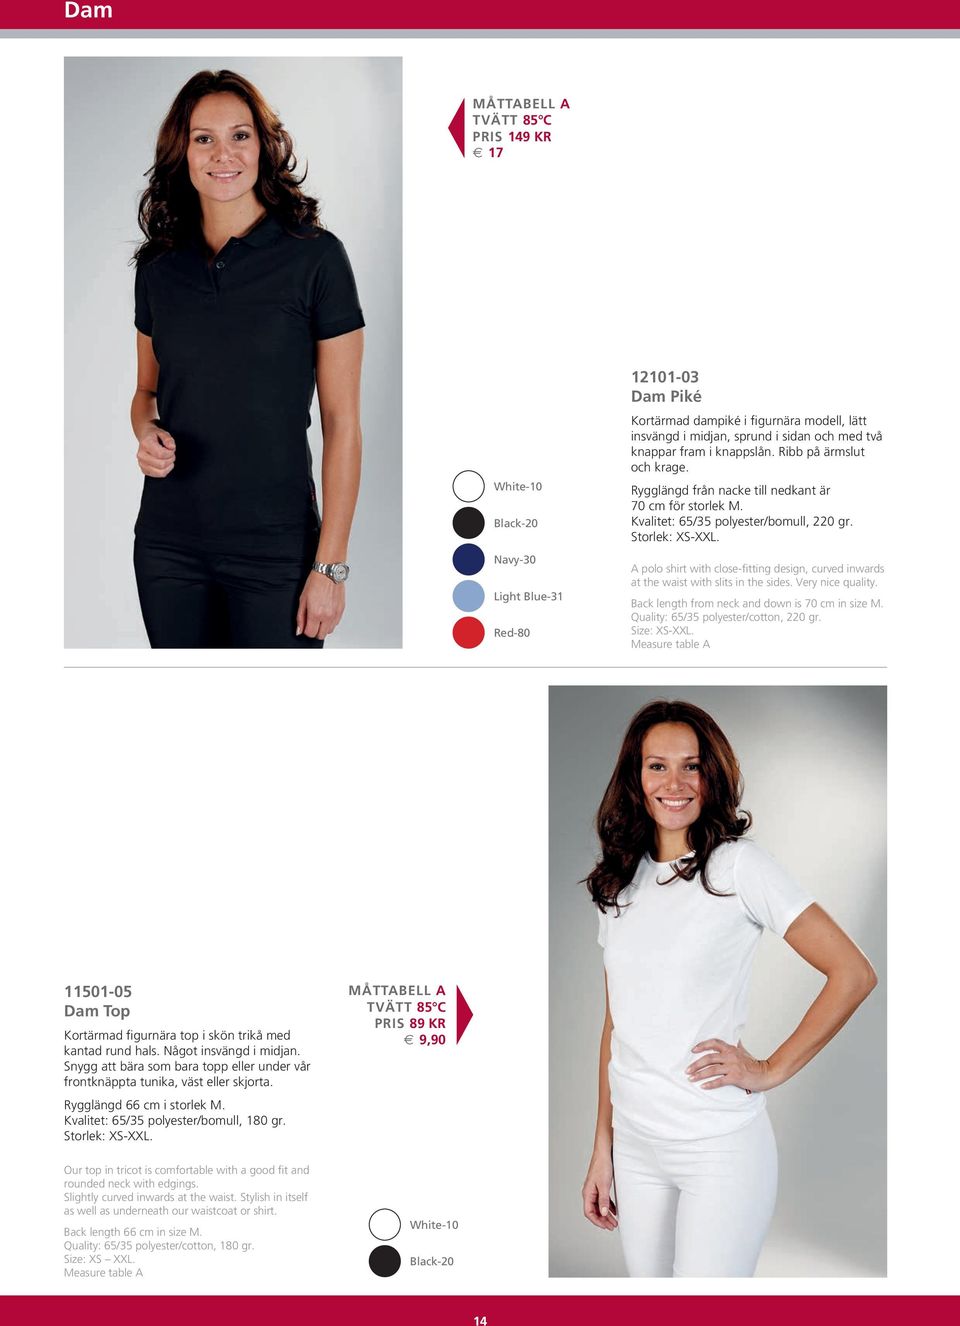 A polo shirt with close-fitting design, curved inwards at the waist with slits in the sides. Very nice quality. Back length from neck and down is 70 cm in size M.